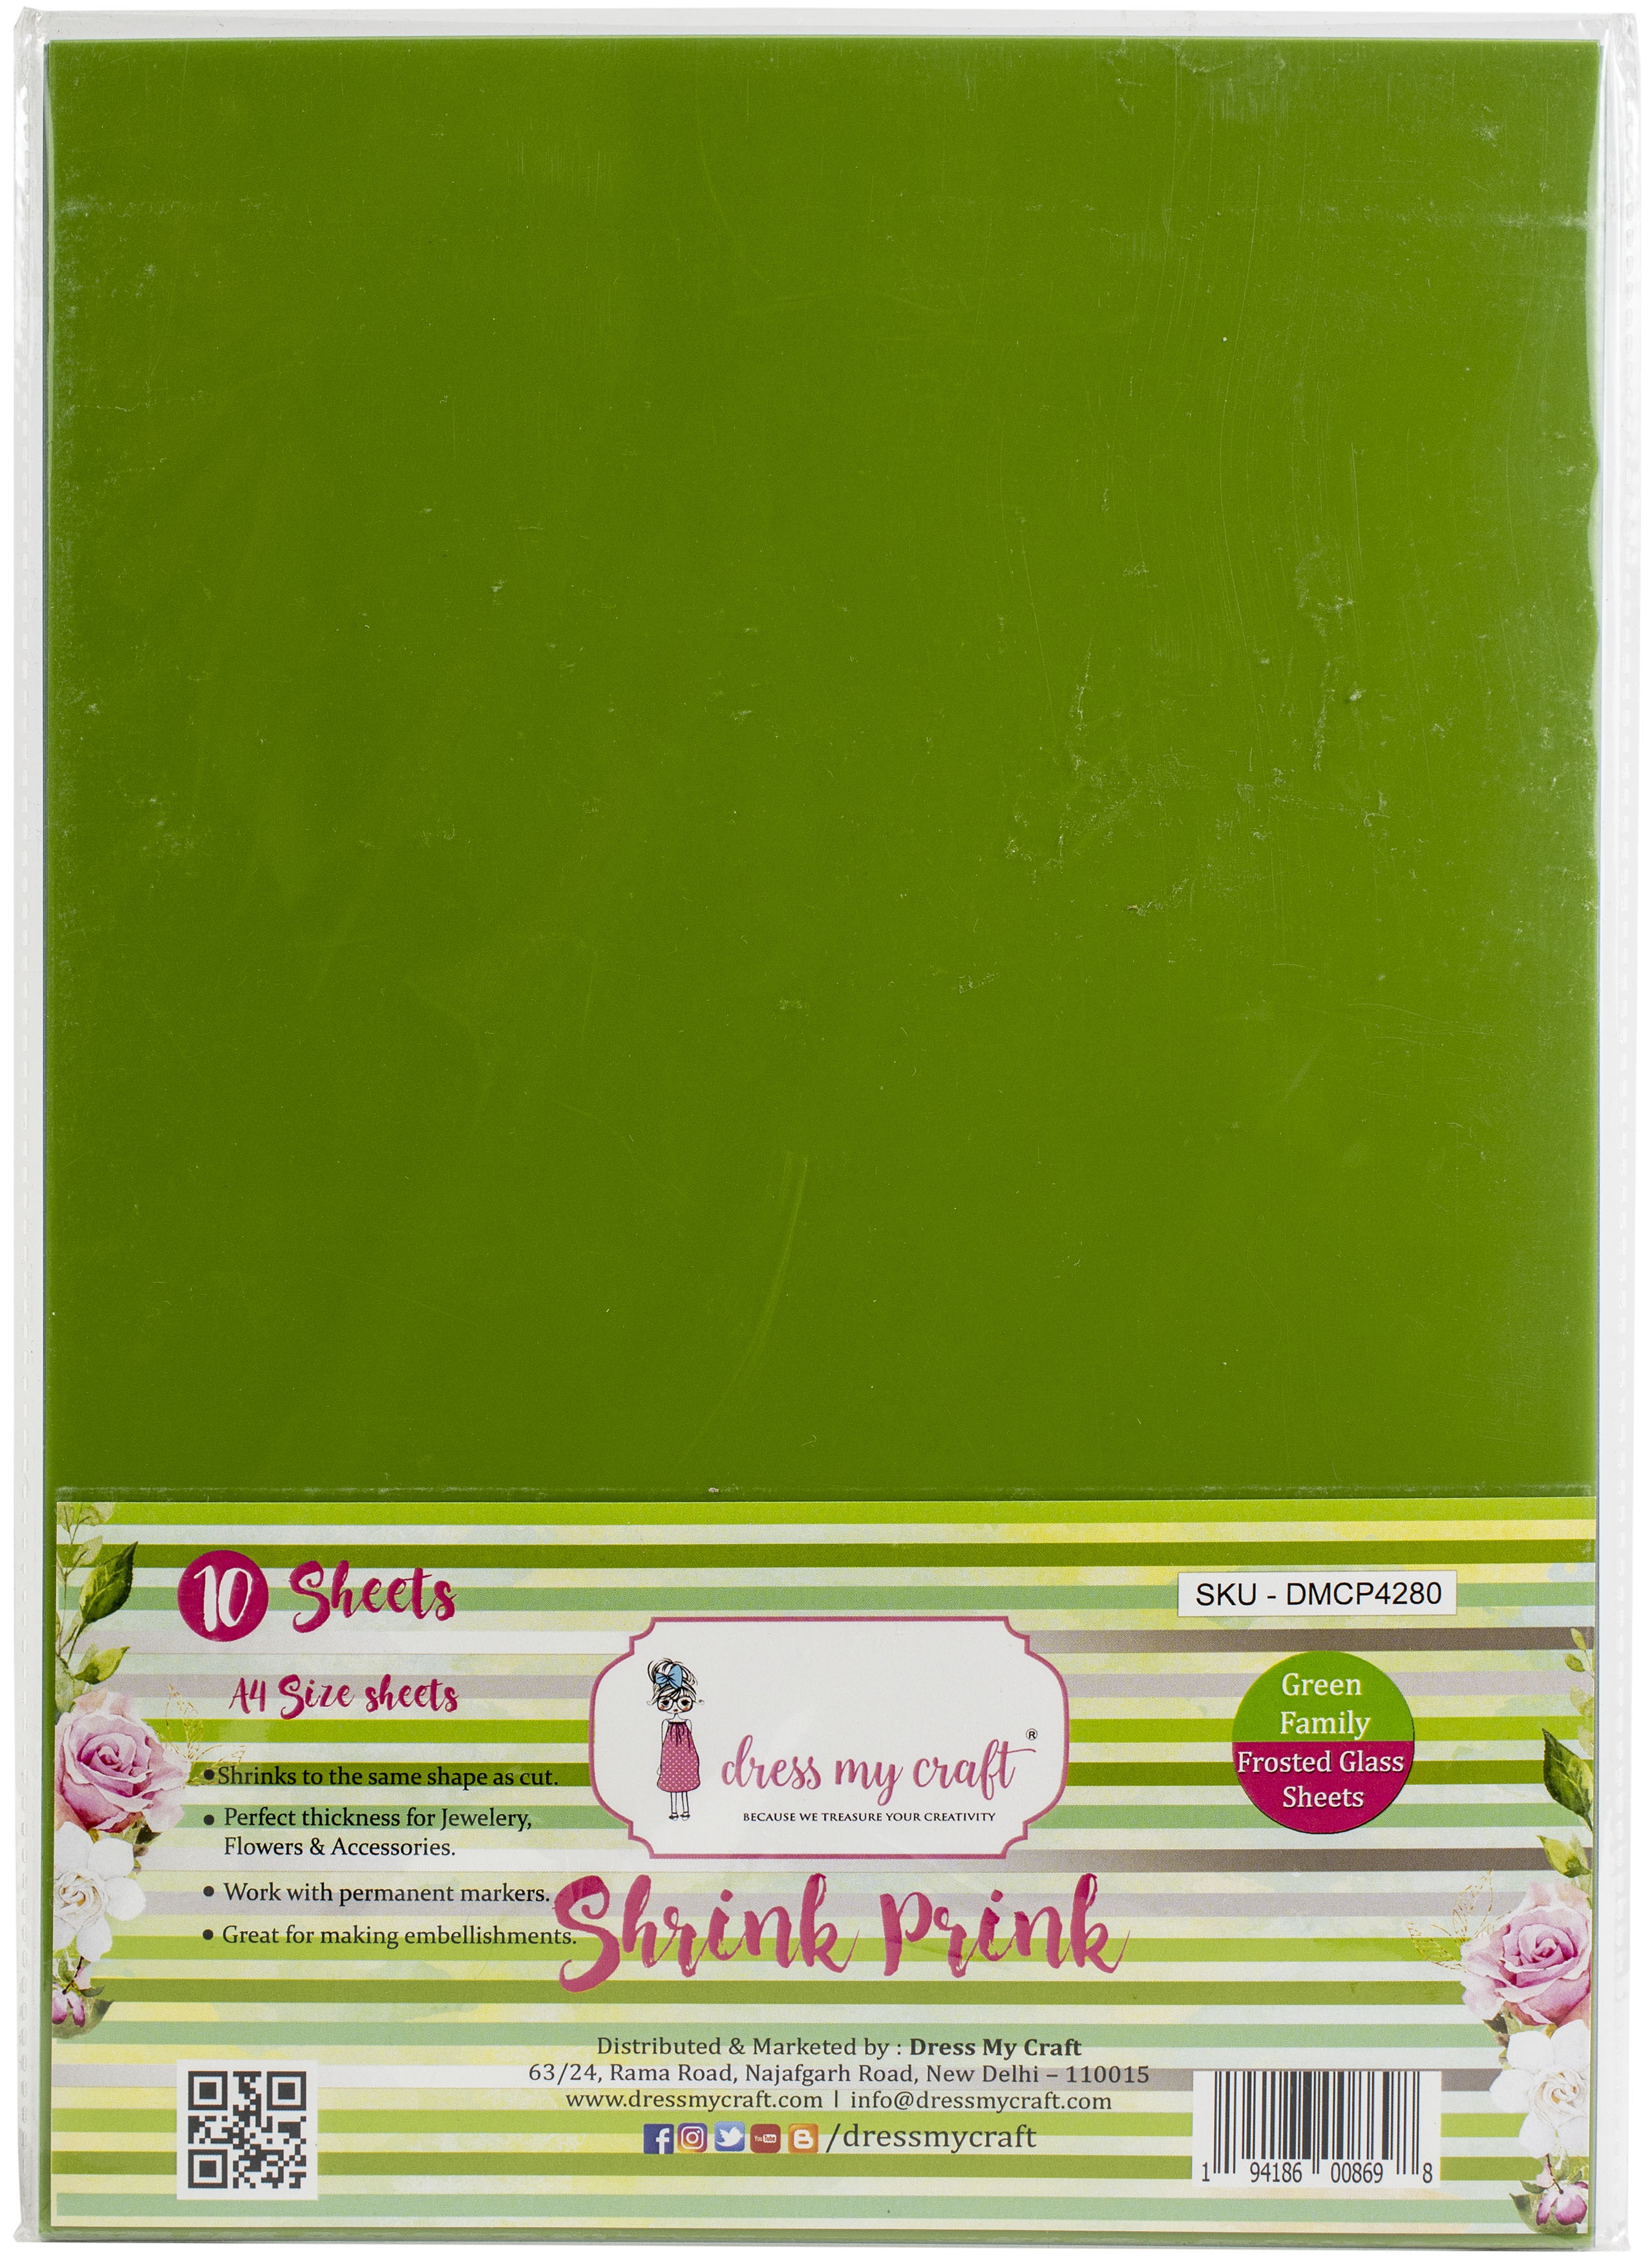 Dress My Craft - 8.5 x 11 - Shrink Prink Frosted Sheets - Value